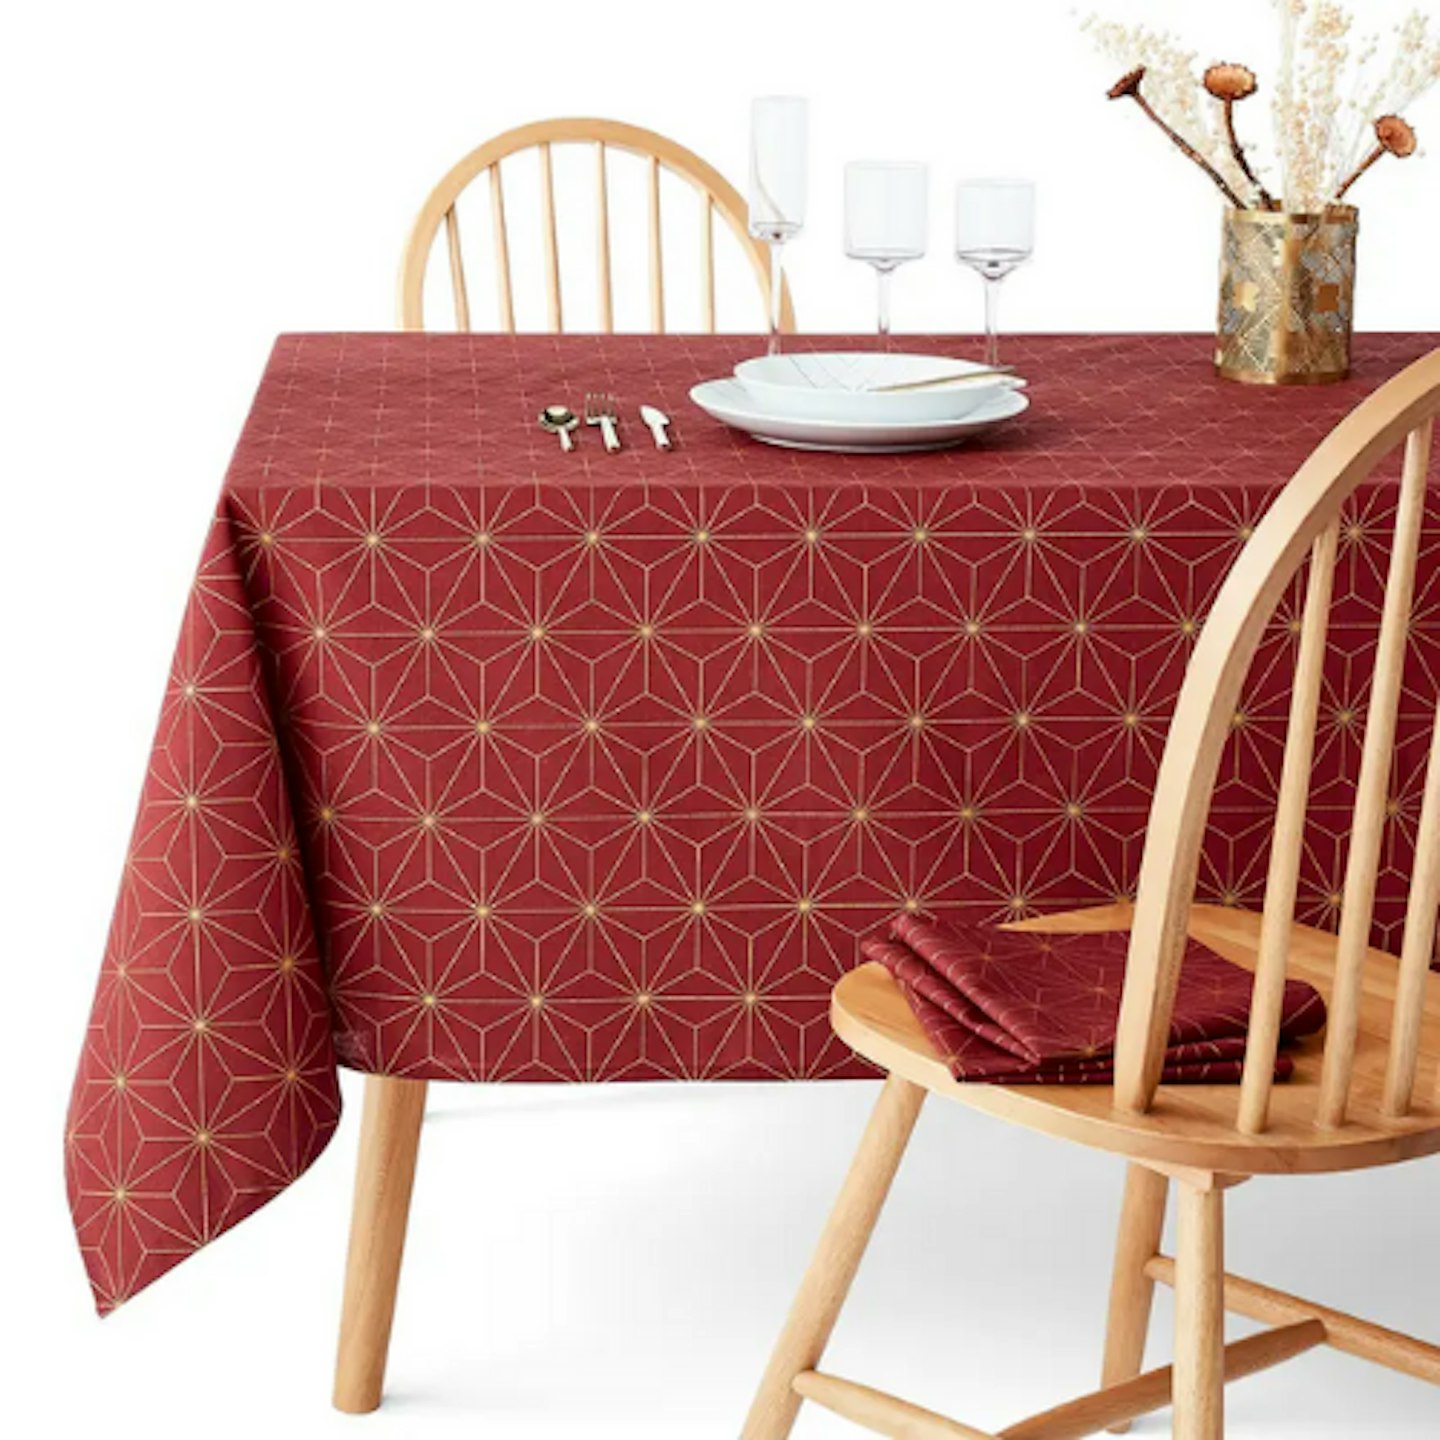 Christmas Tablecloth: La Redoute Interieurs Nordic Star Patterned Tablecloth